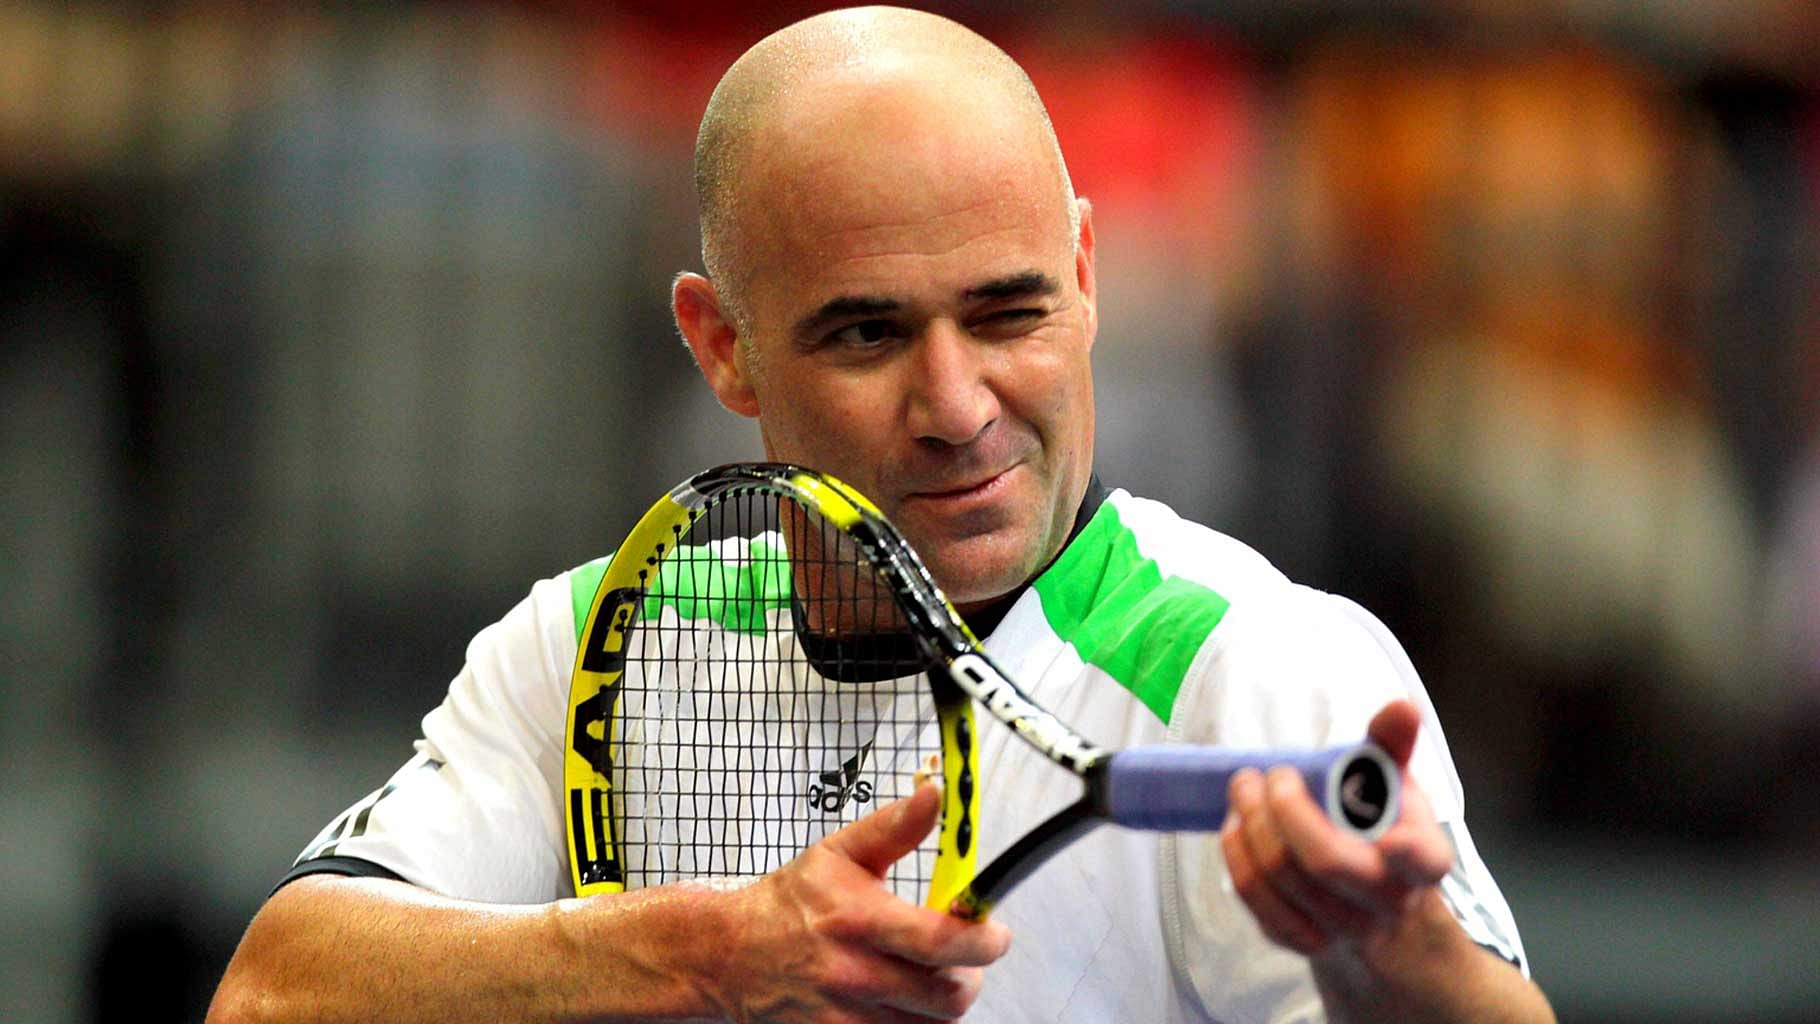 File photo of Andre Agassi.